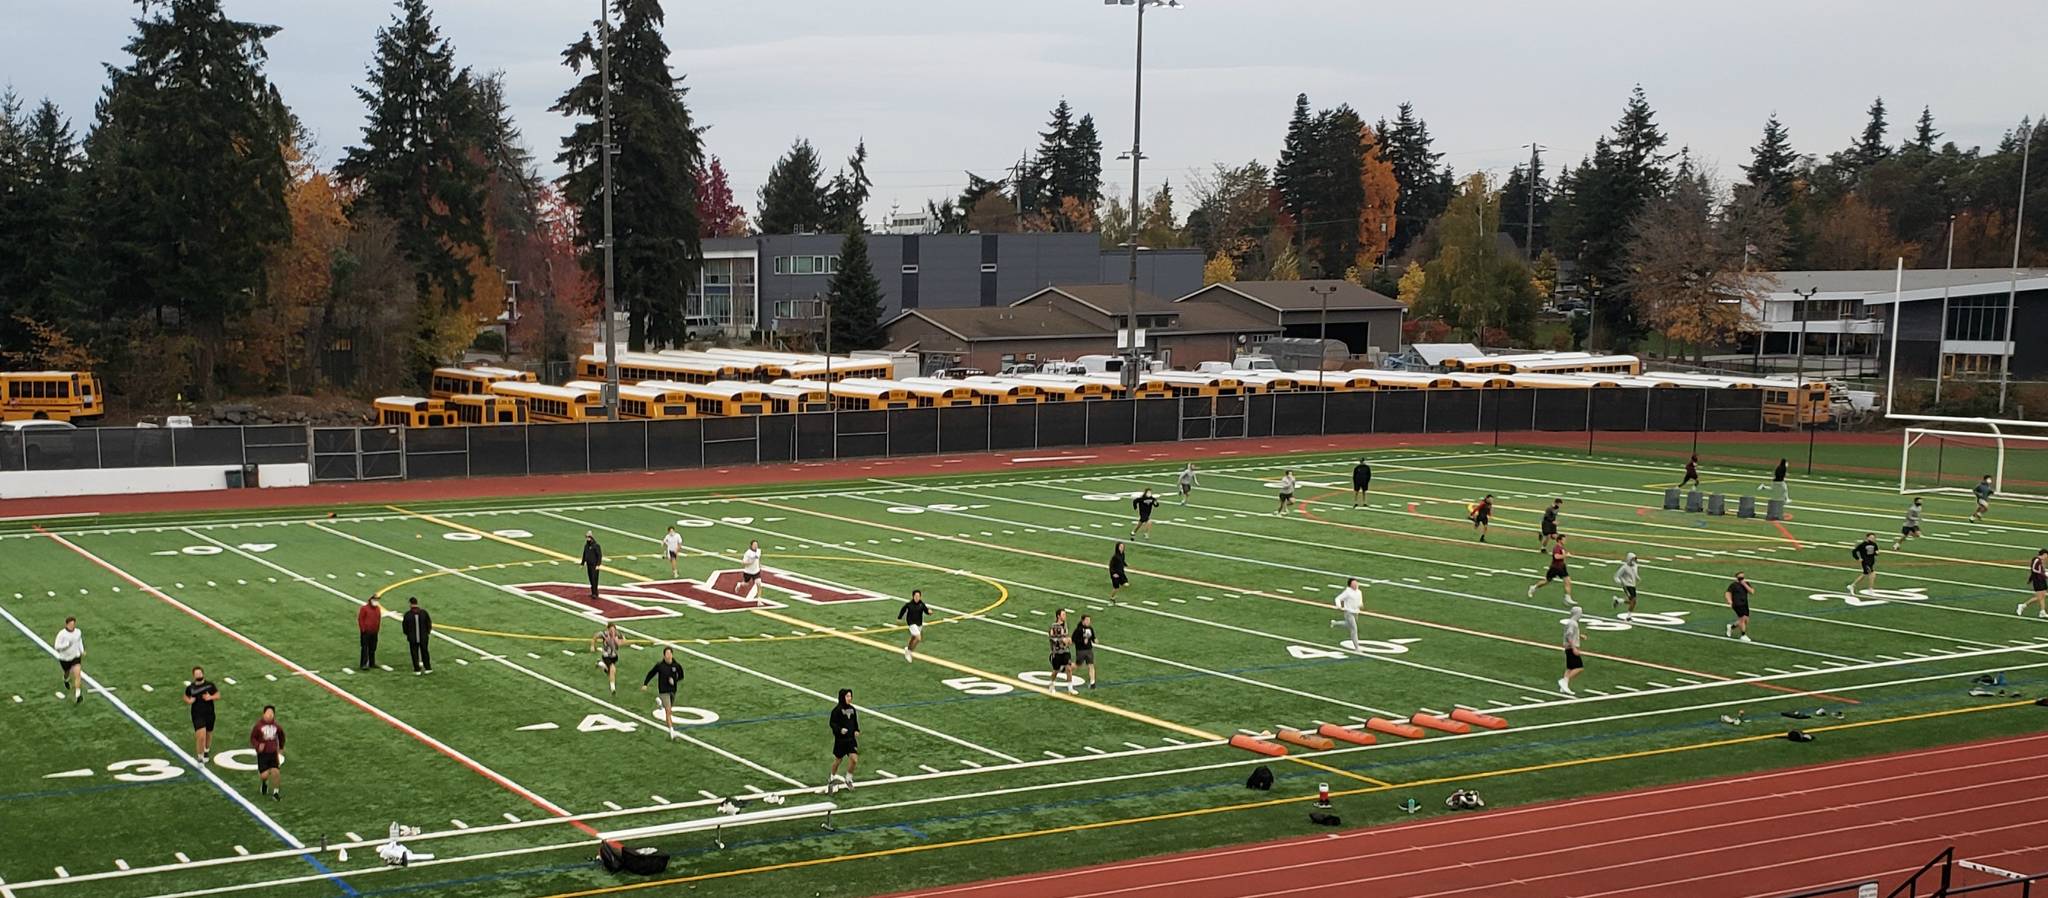 Mercer Island High School football players participate in a recent practice, which features six-person pods. Photo courtesy of Kyle McKenna